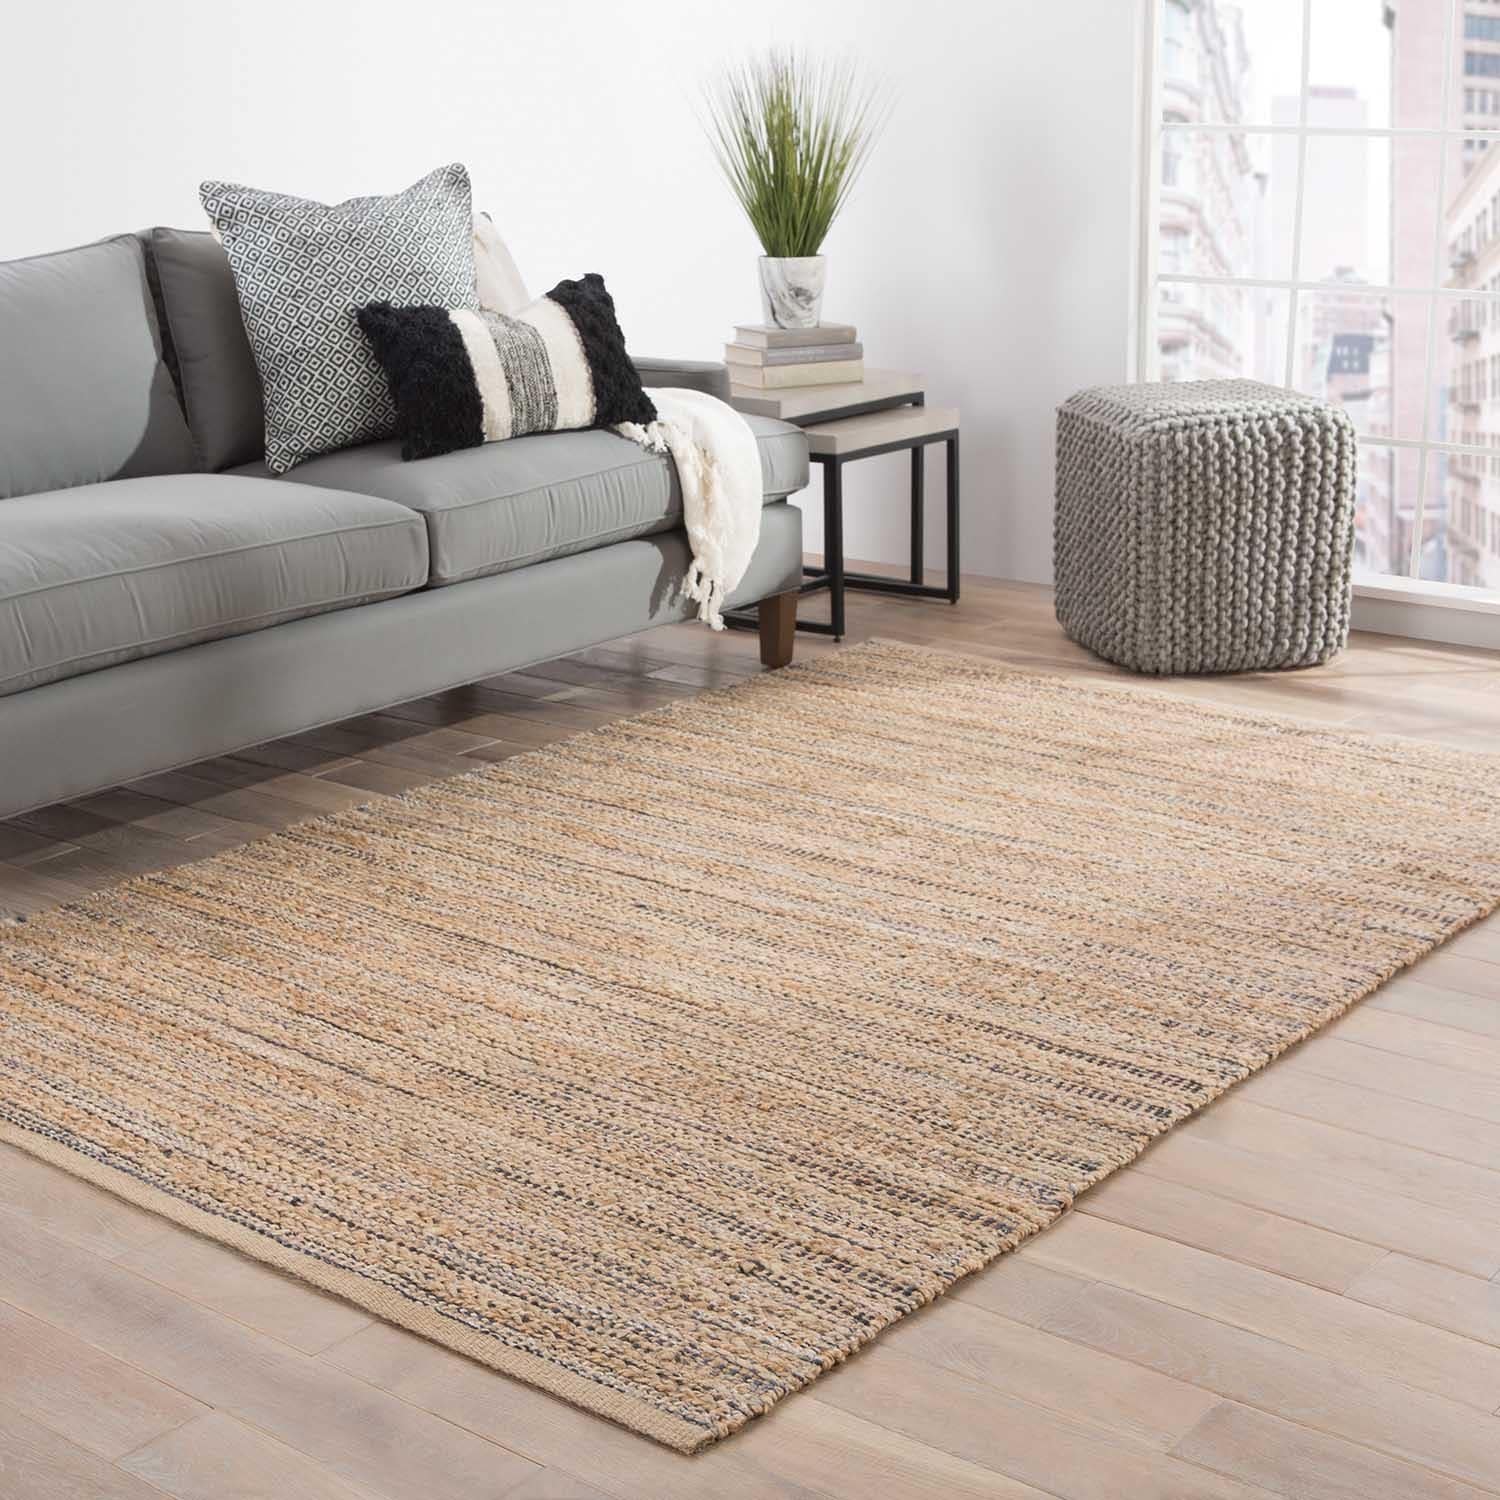 Hand made Solid Pattern Taupe/ Gray Cotton/ Jute Rug (2.6x4)